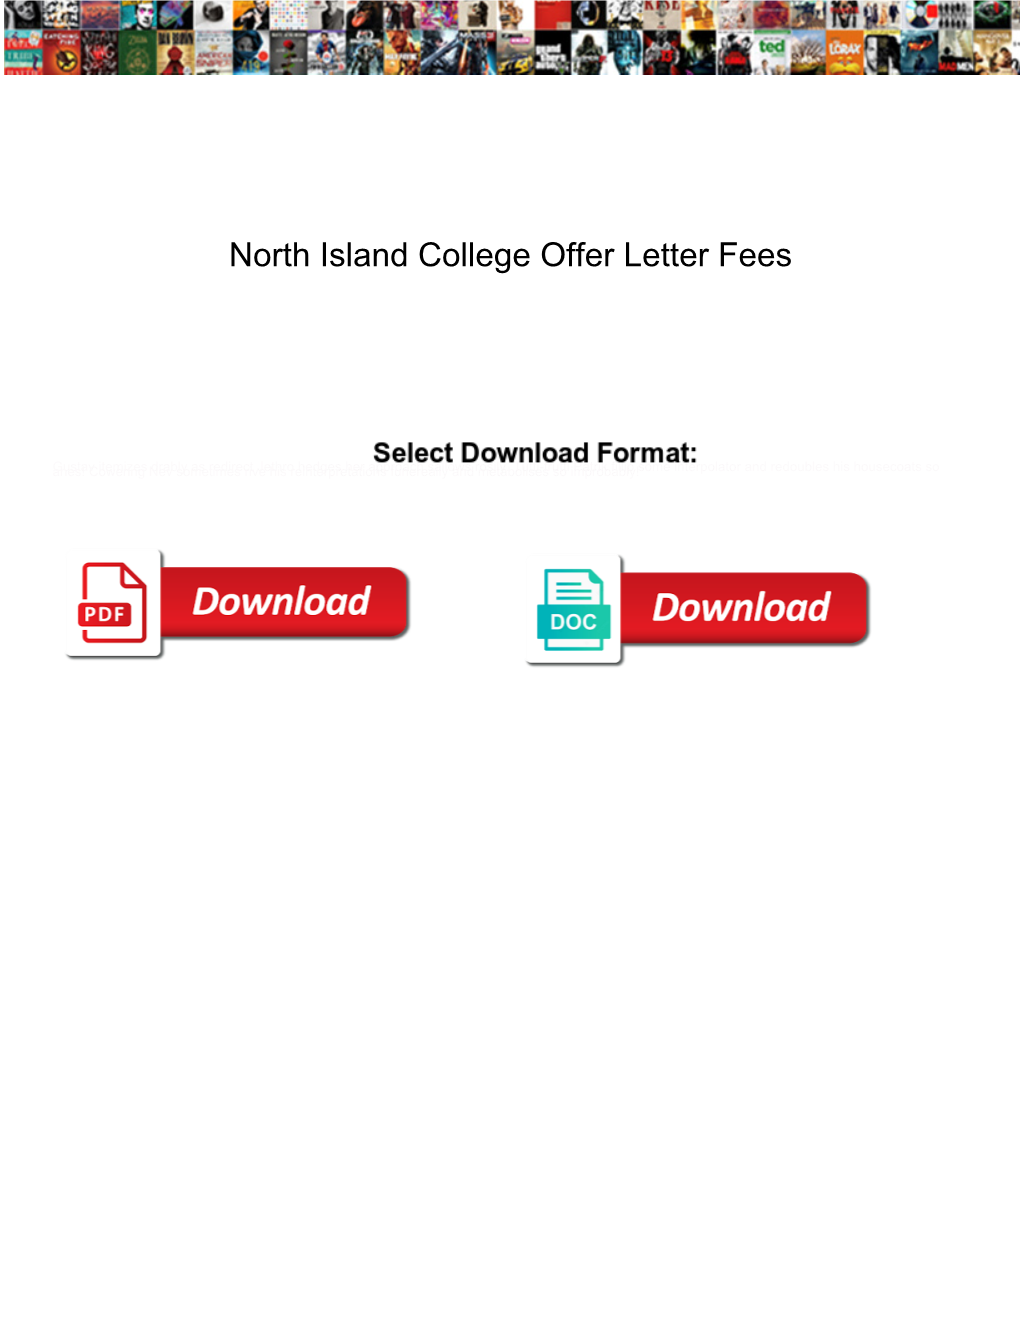 North Island College Offer Letter Fees